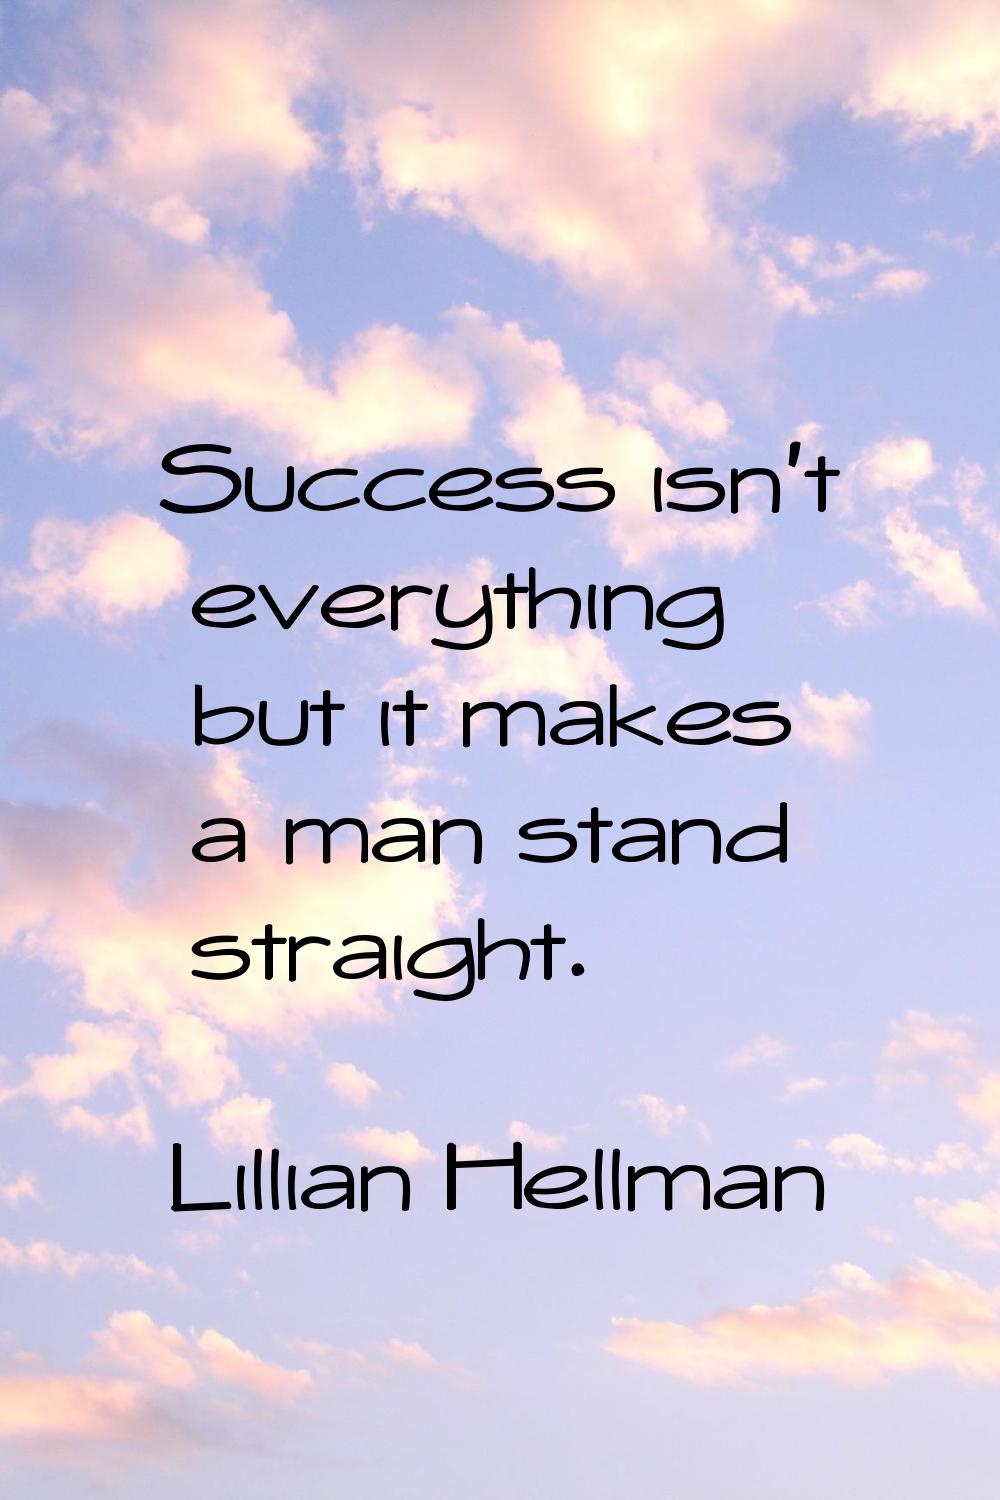 Success isn't everything but it makes a man stand straight.